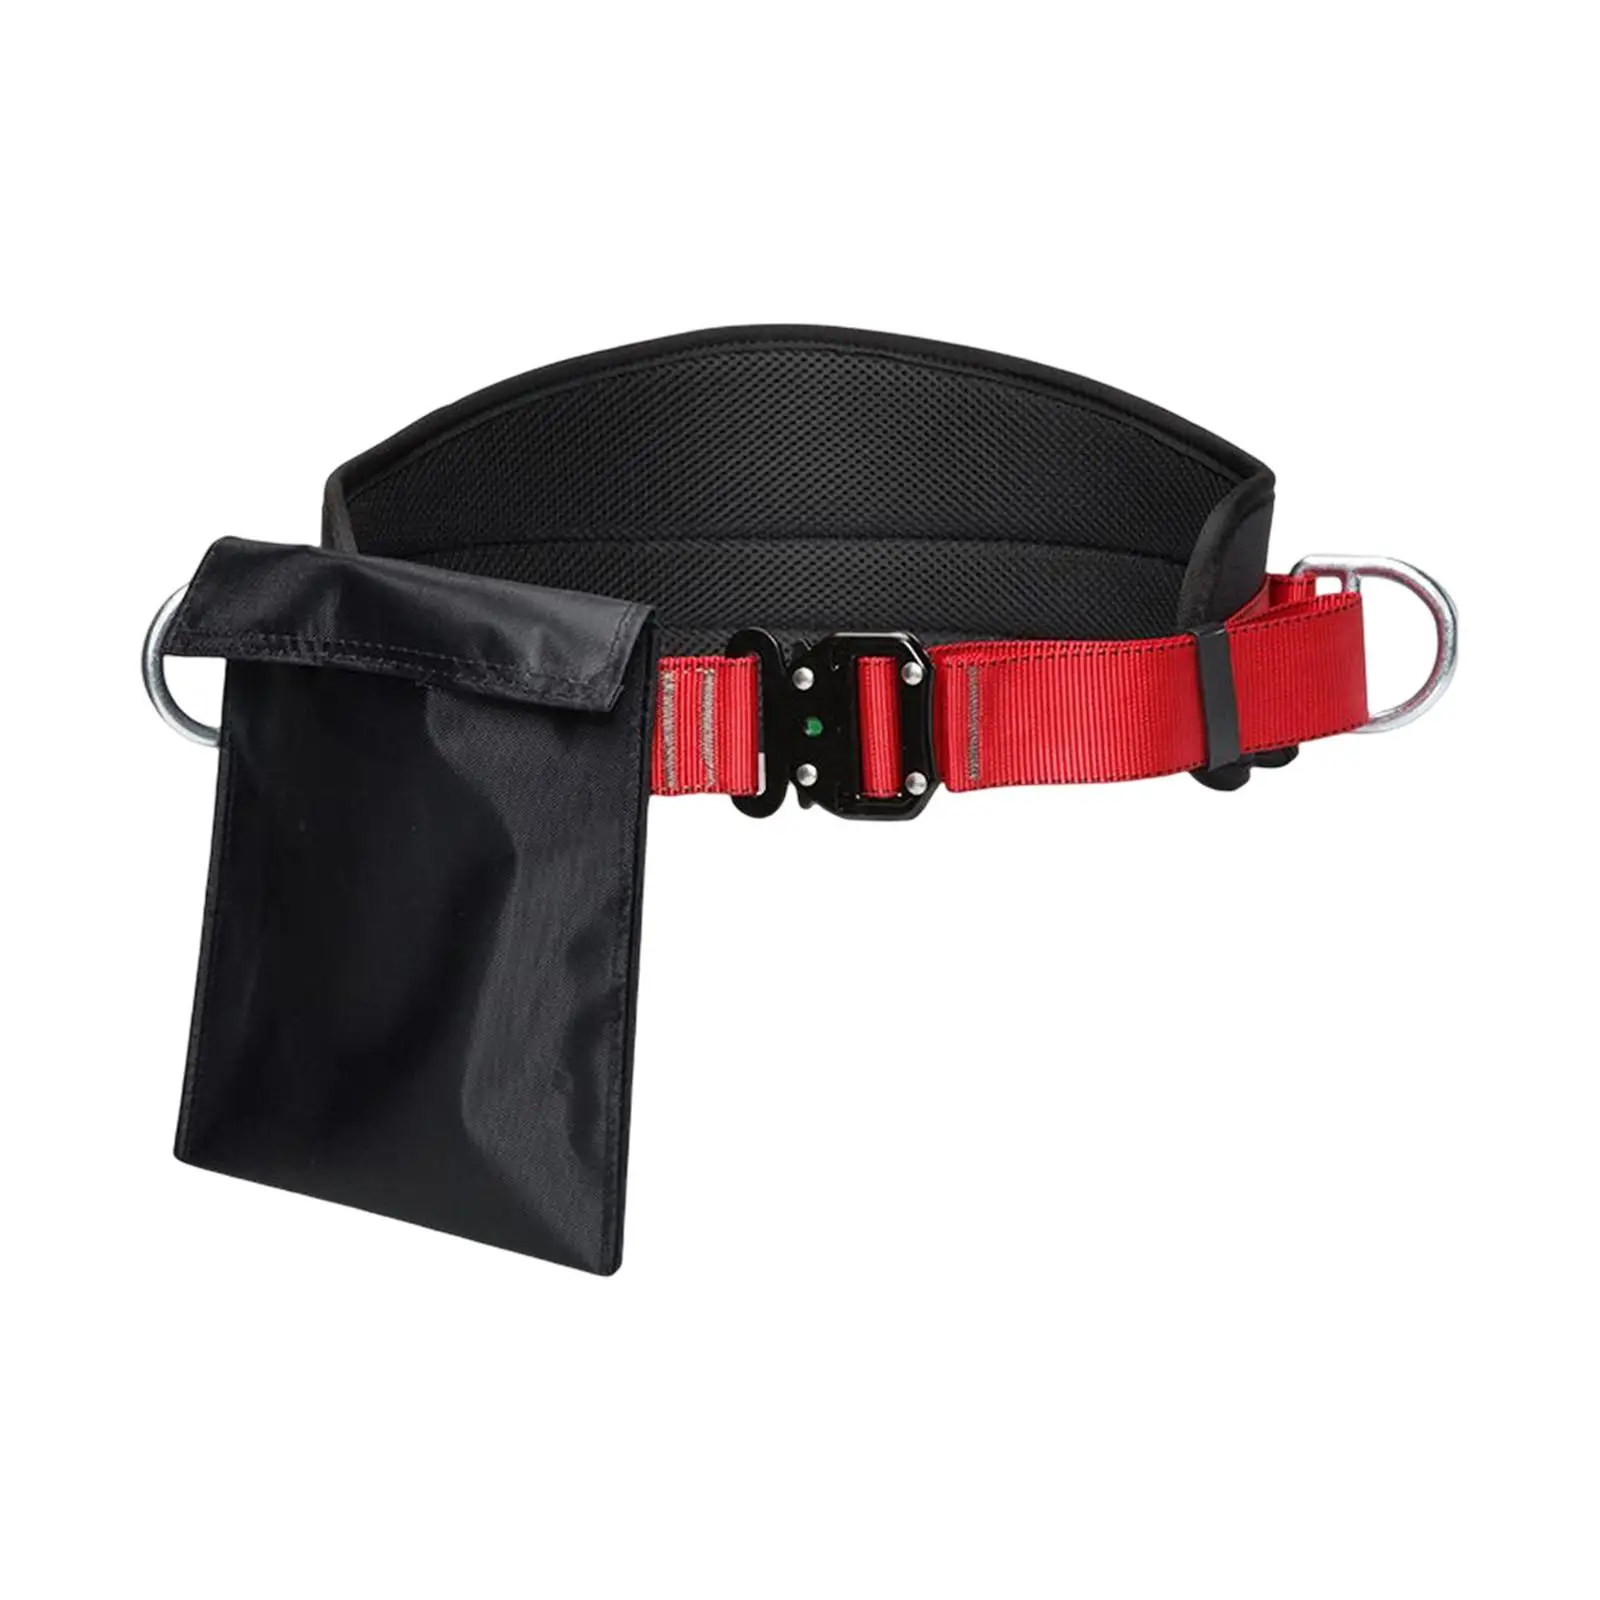 Climbing Safety Harness Protective Equipment with D Rings Waist Belt for Outdoor